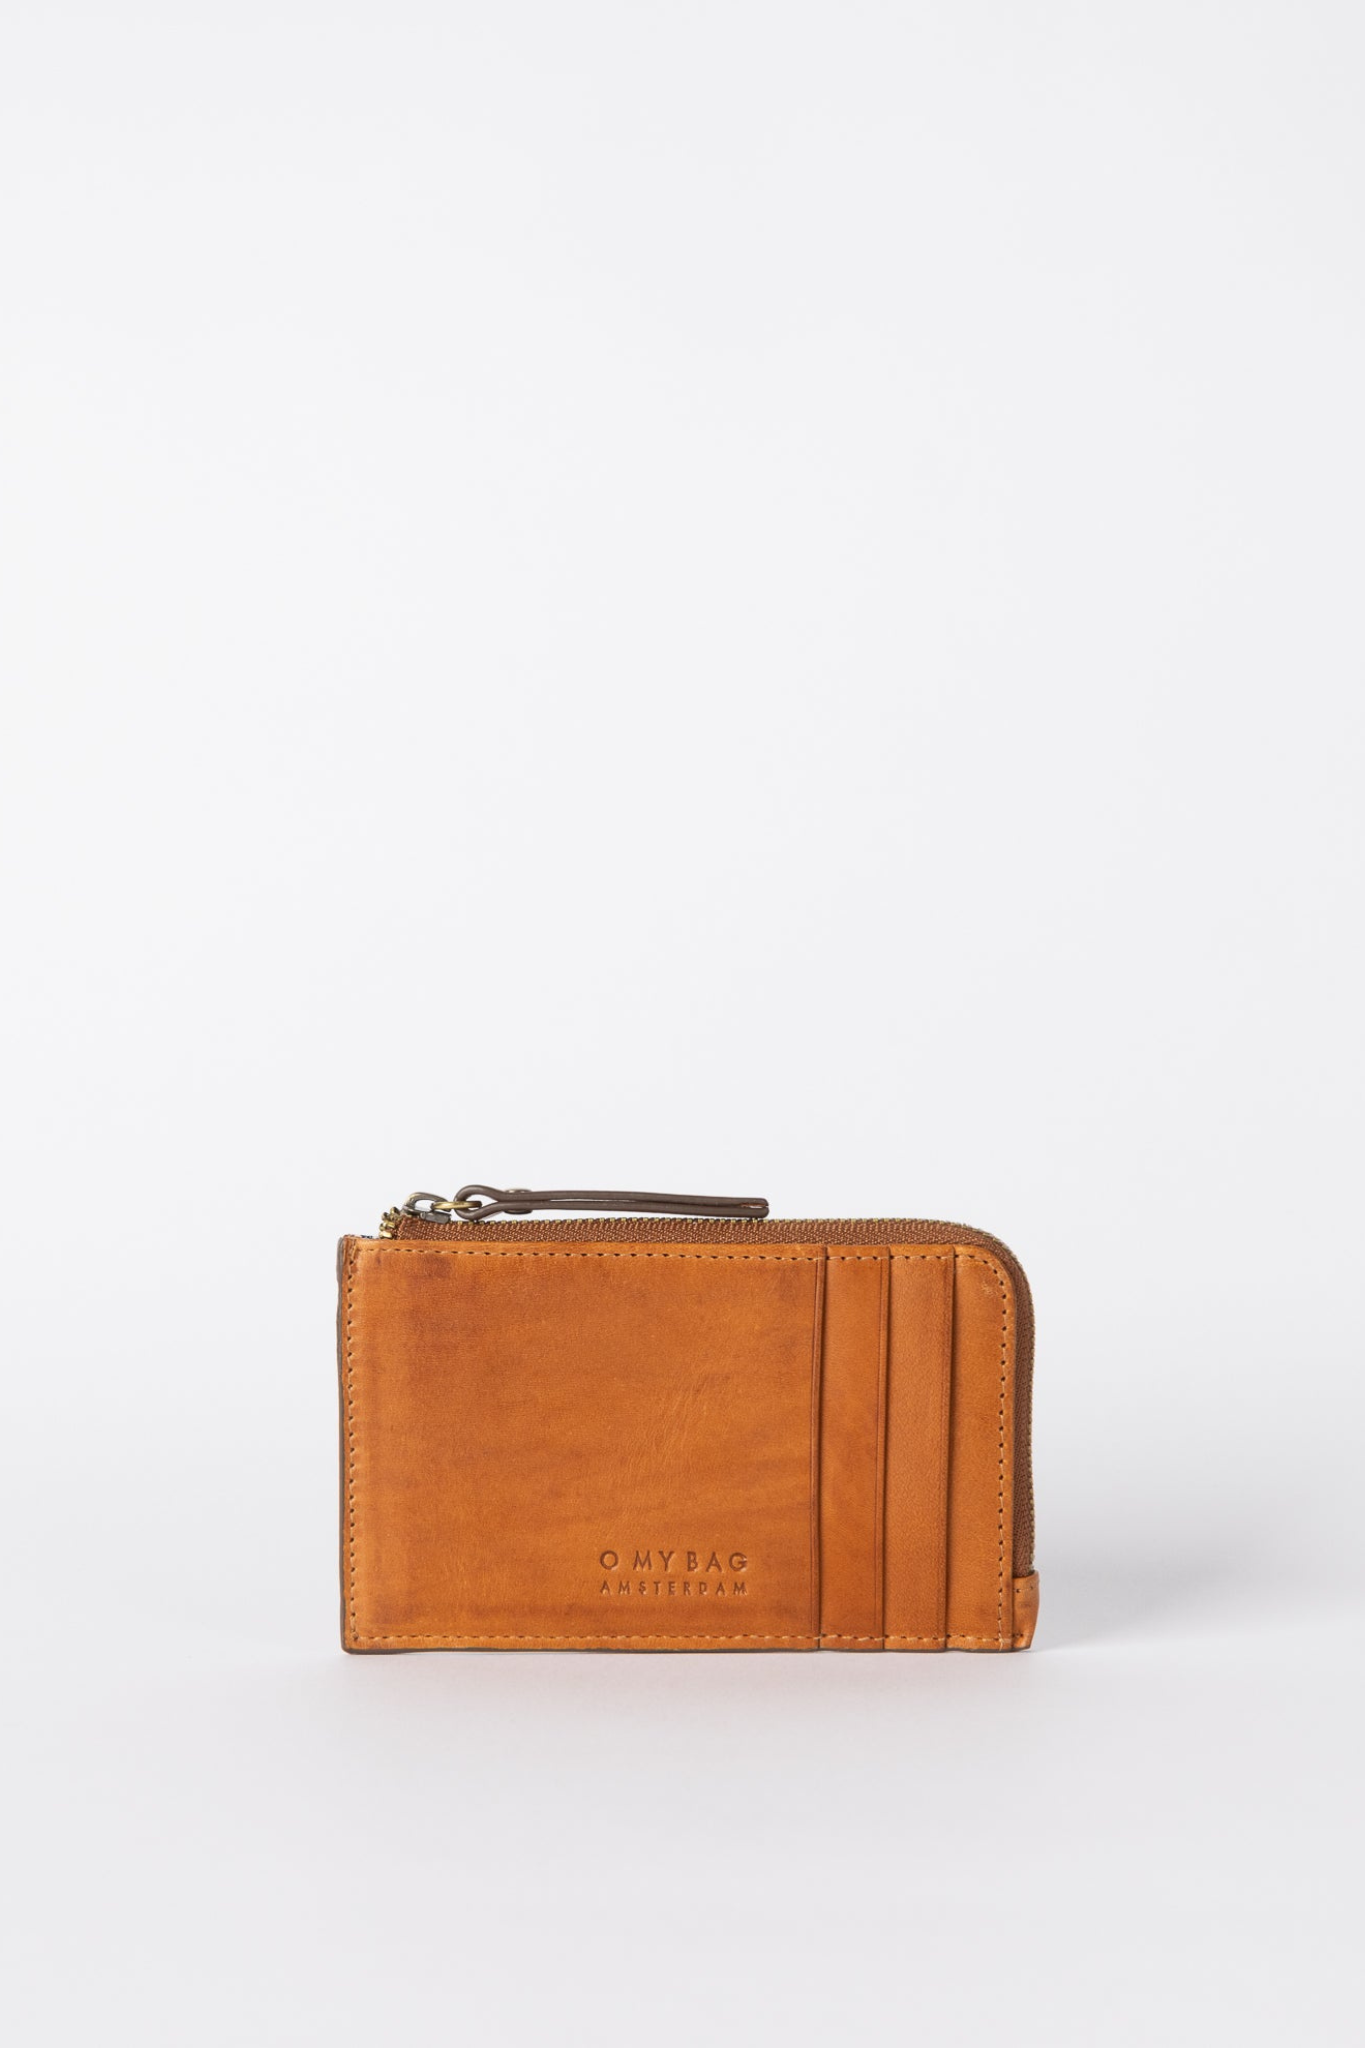 LOLA COIN PURSE - COGNAC CLASSIC LEATHER - BROWN